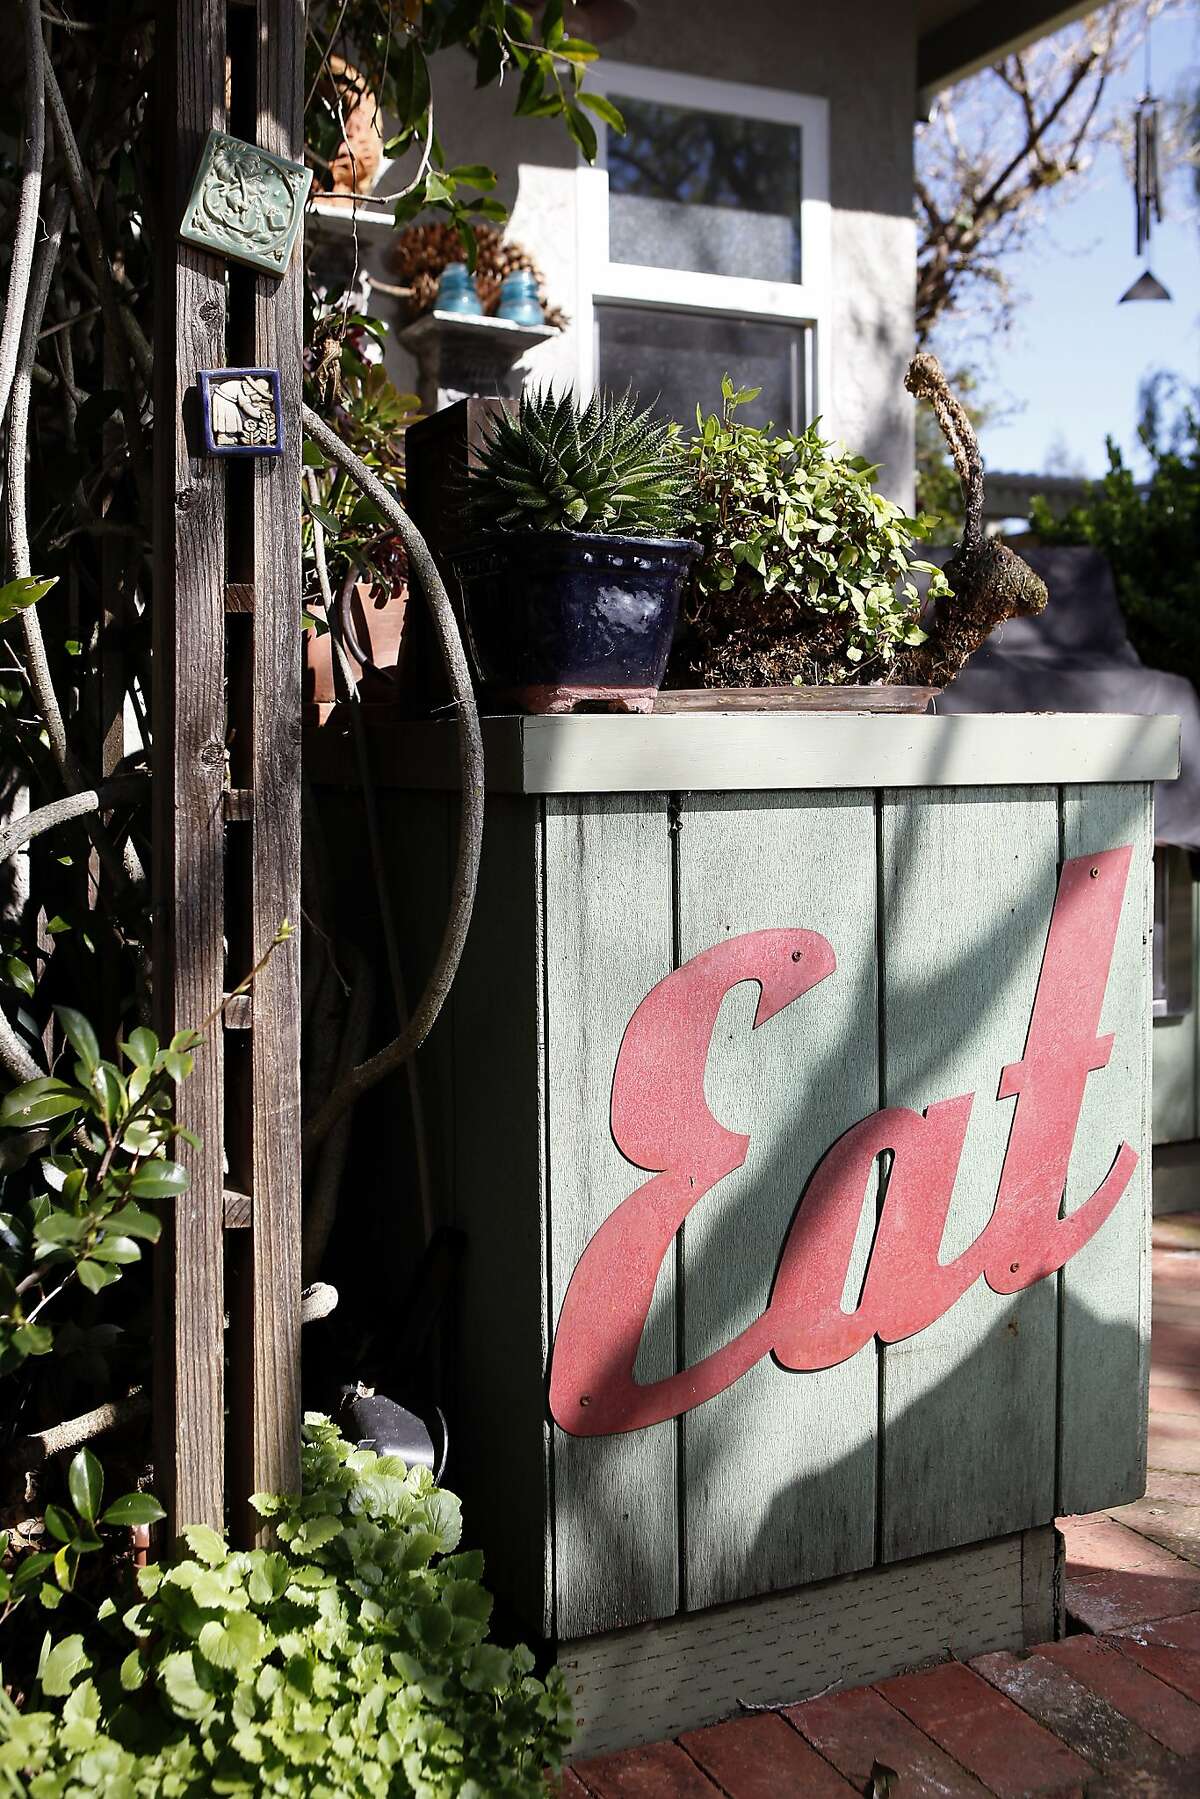 Some easy ways to revive your garden